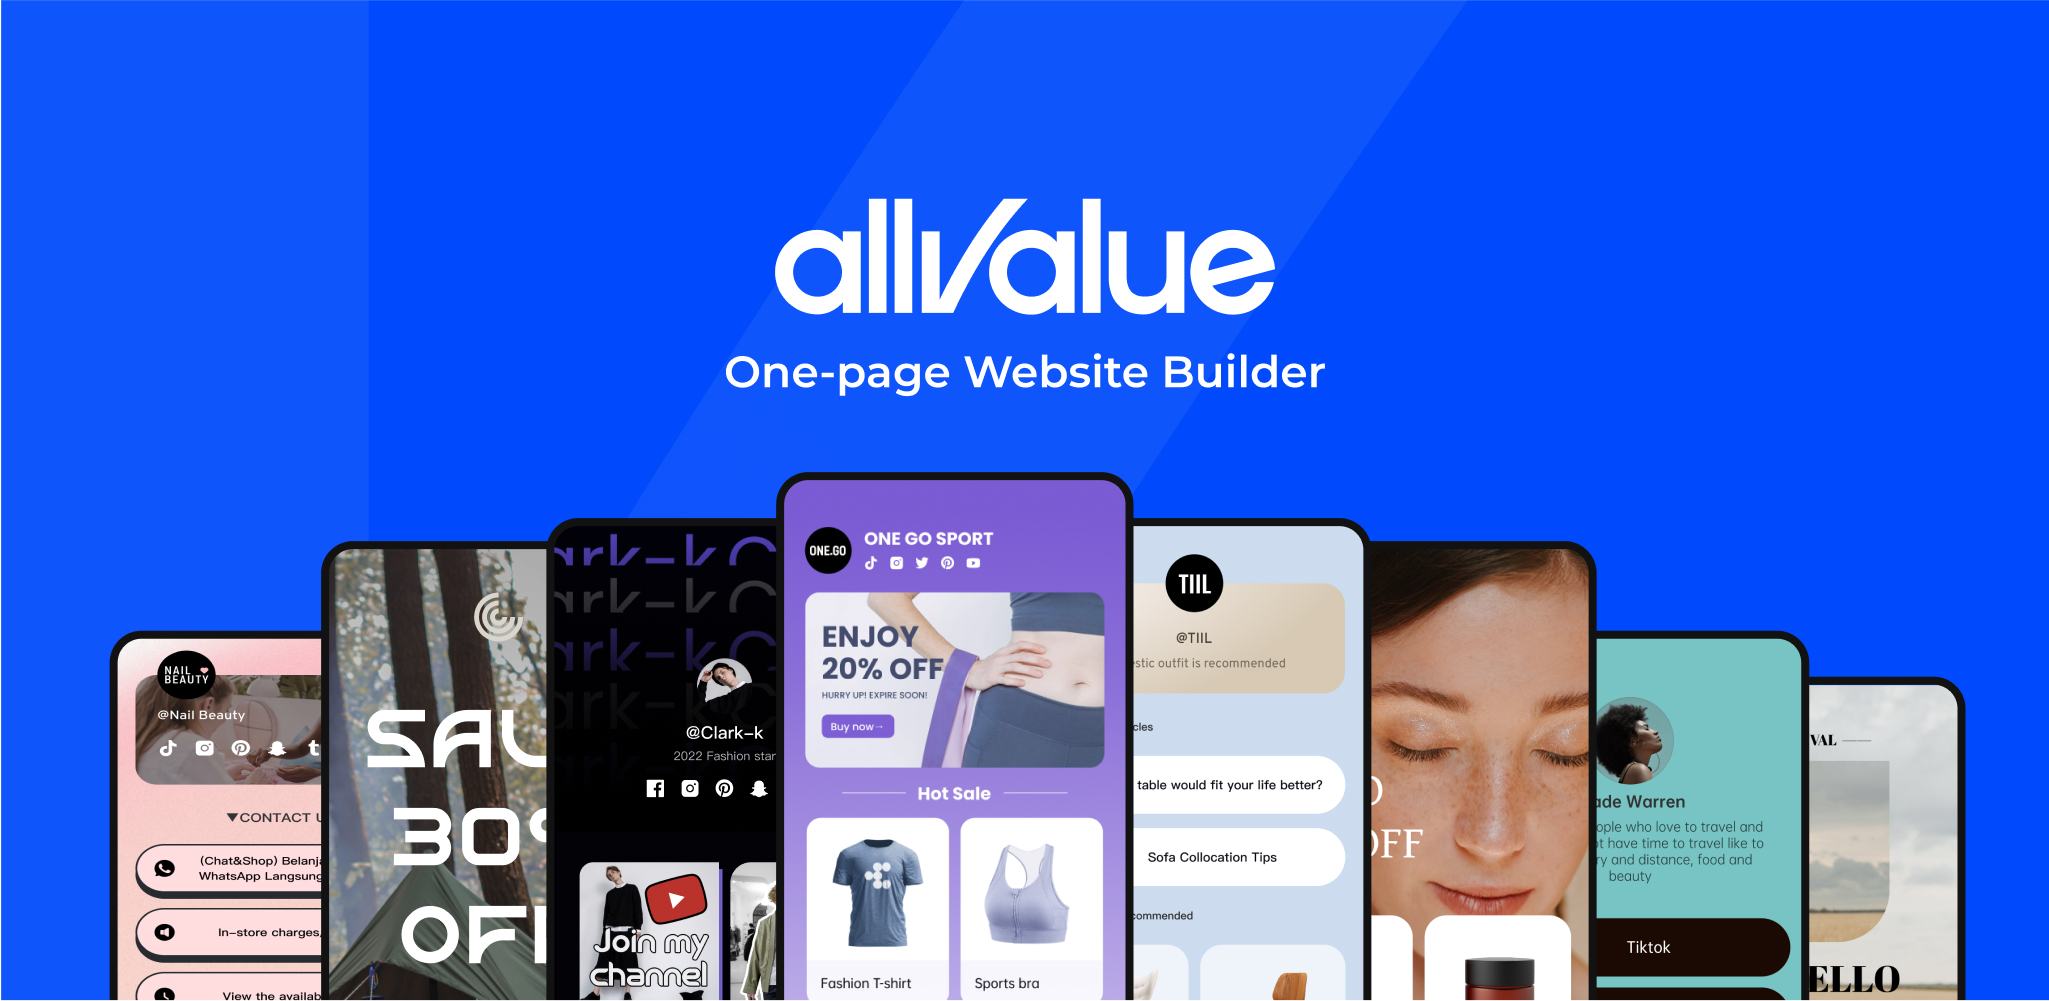 AllValue is the easiest one-page website builder that helps consolidate your content and grow any business on all social networks like Instagram, TikTok, YouTube, and Twitter, whether you are a brand owner, retailer or creator